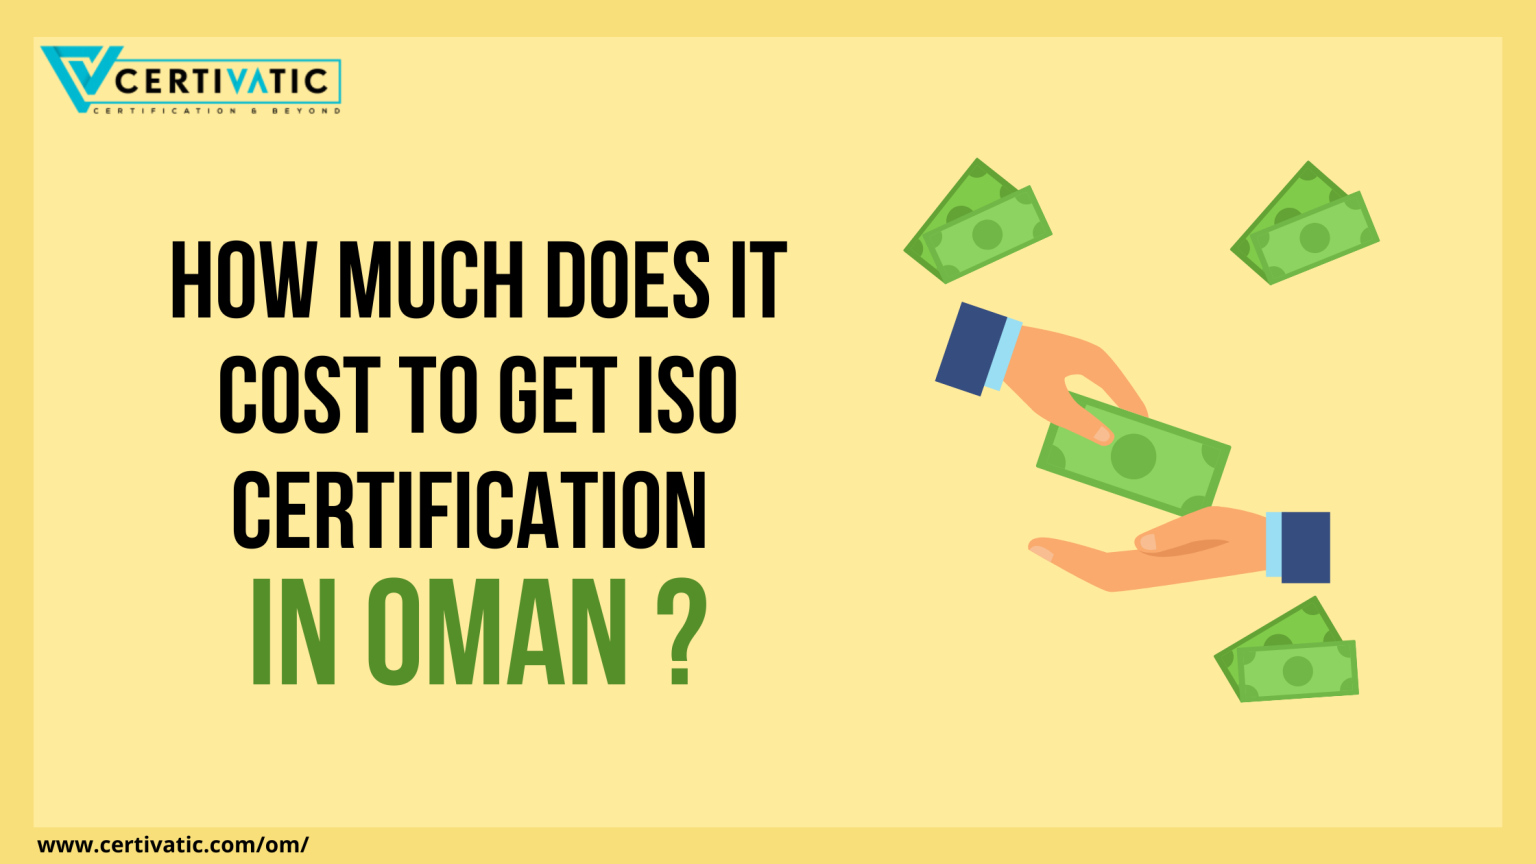 How much does it cost to get ISO certification in Oman?